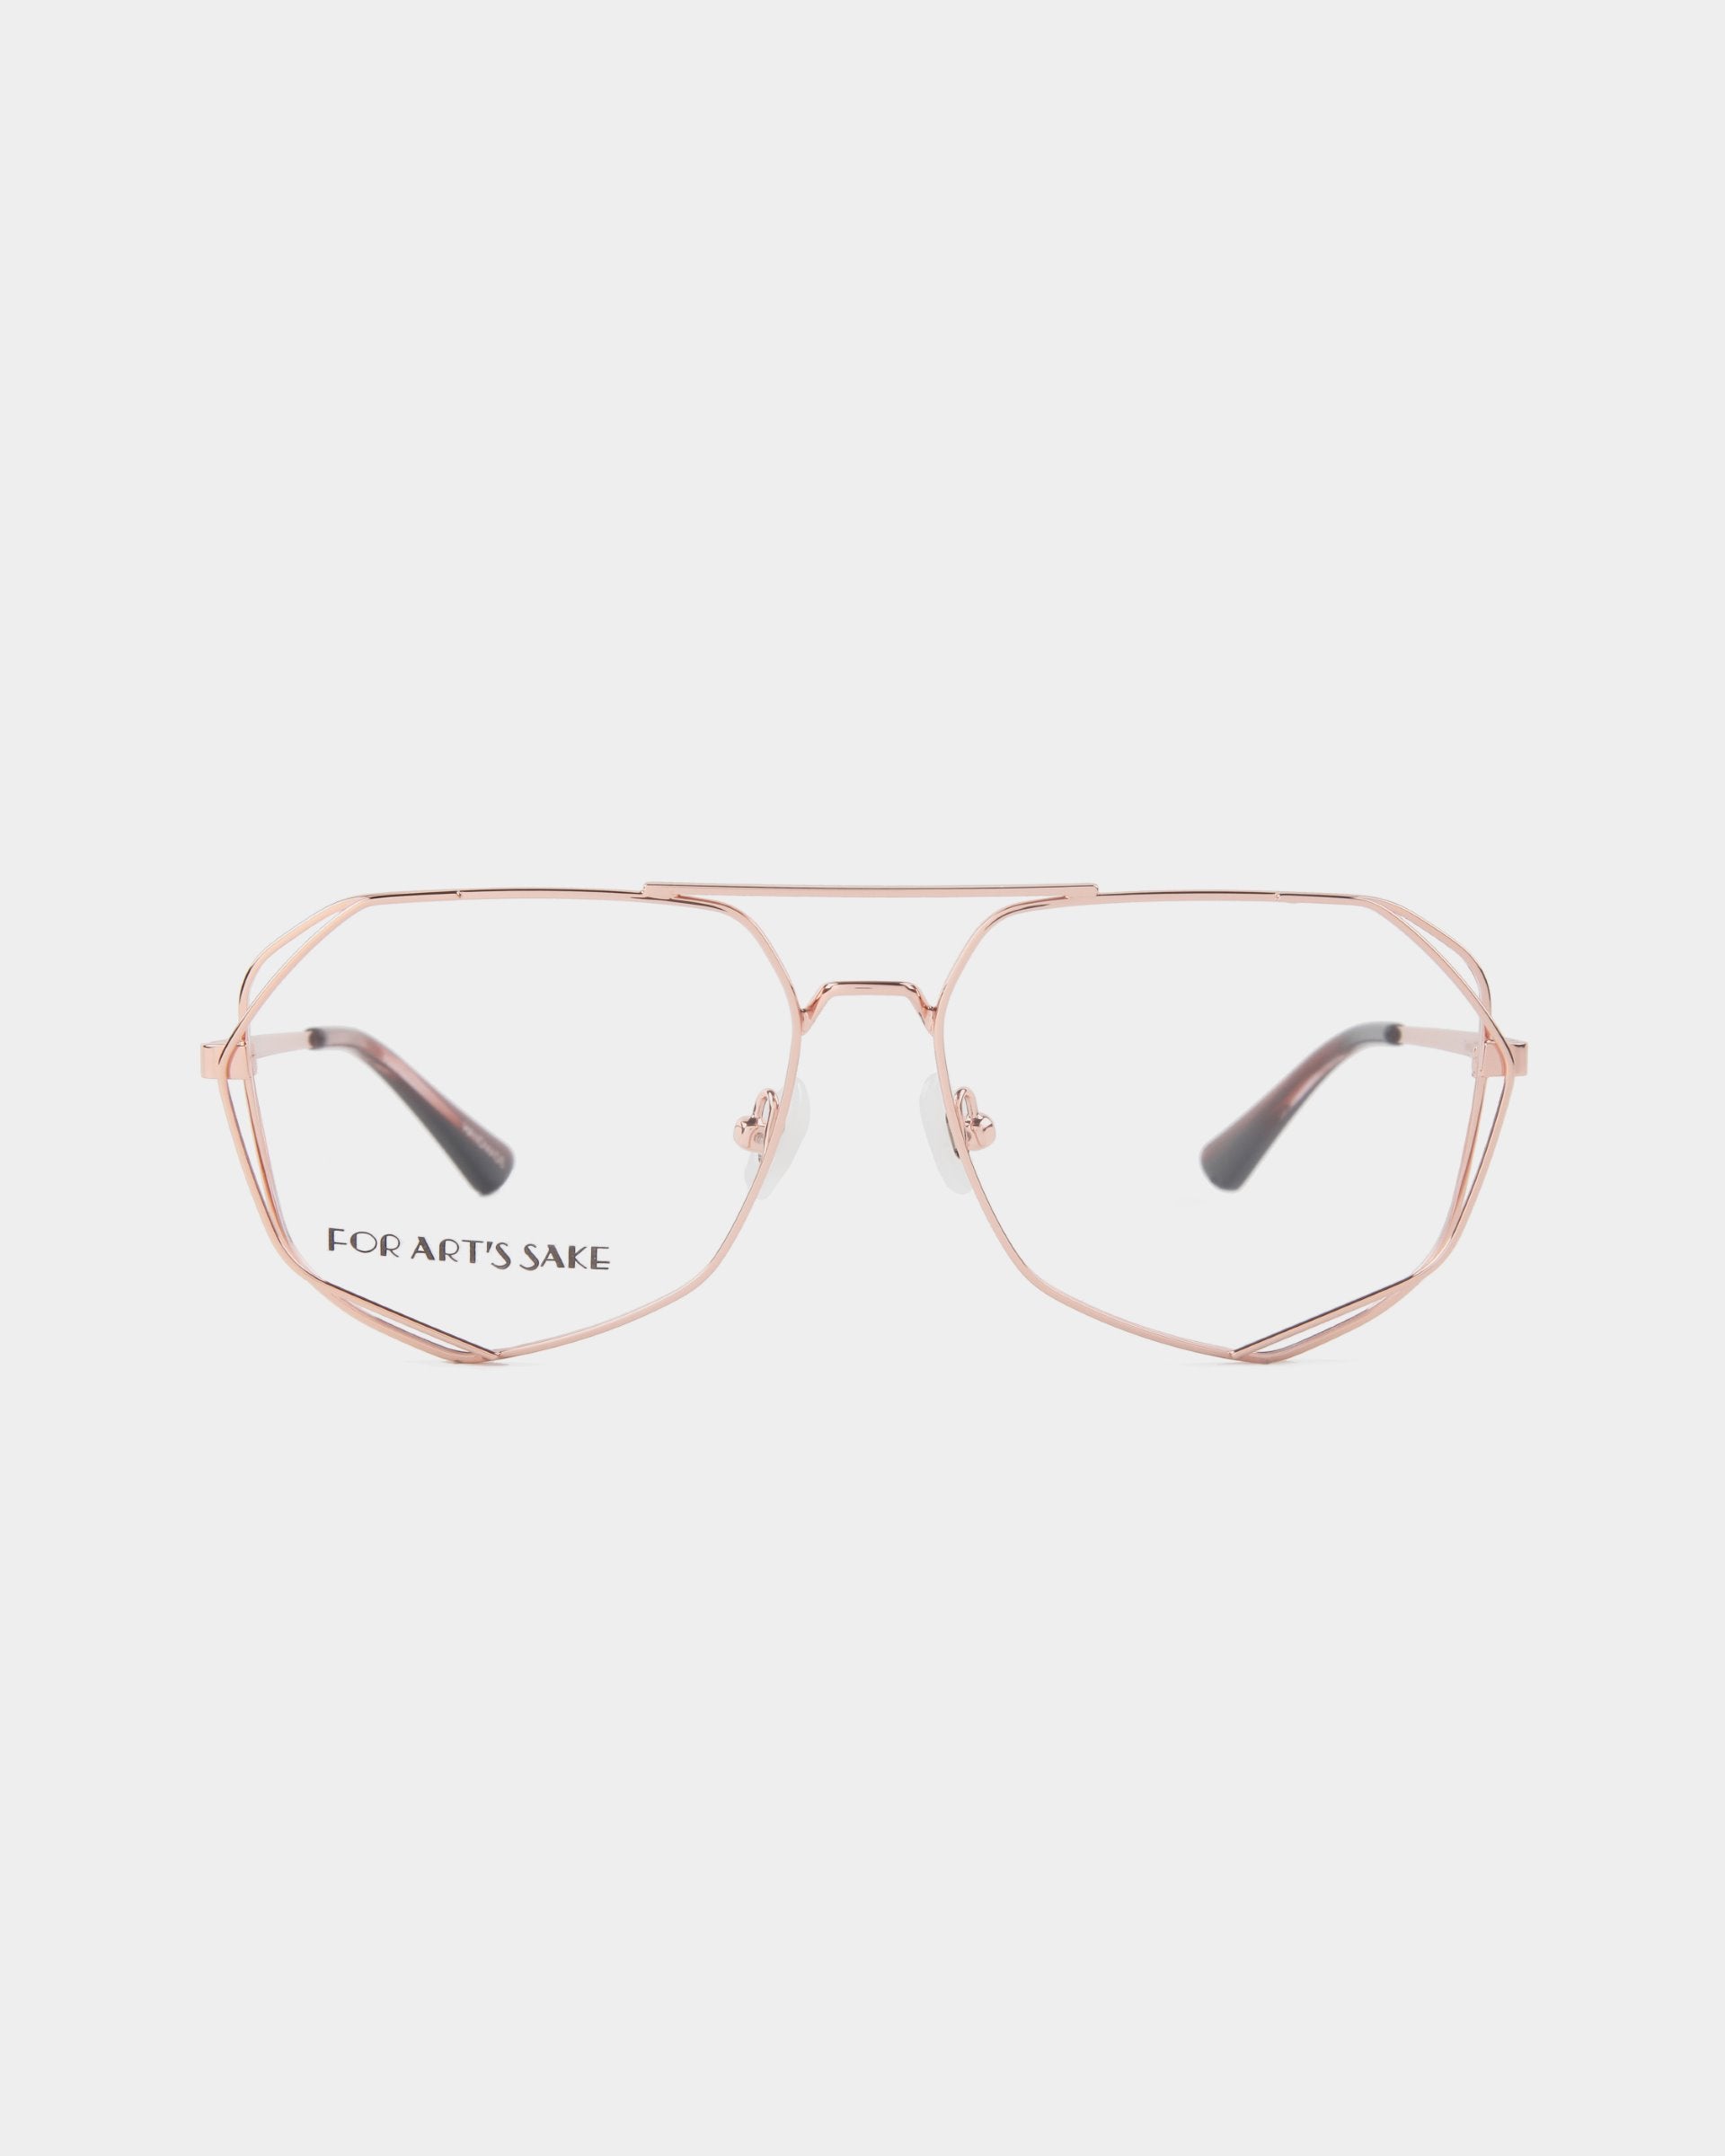 A pair of stylish, rose-gold wireframe eyeglasses with oversized geometric lenses. The stainless steel frames by "For Art's Sake®" are printed in black on the left lens. The design features a thin double bridge and transparent nose pads for comfort. The background is white. 

Product Name: "Genius"
Brand Name: "For Art's Sake®"
